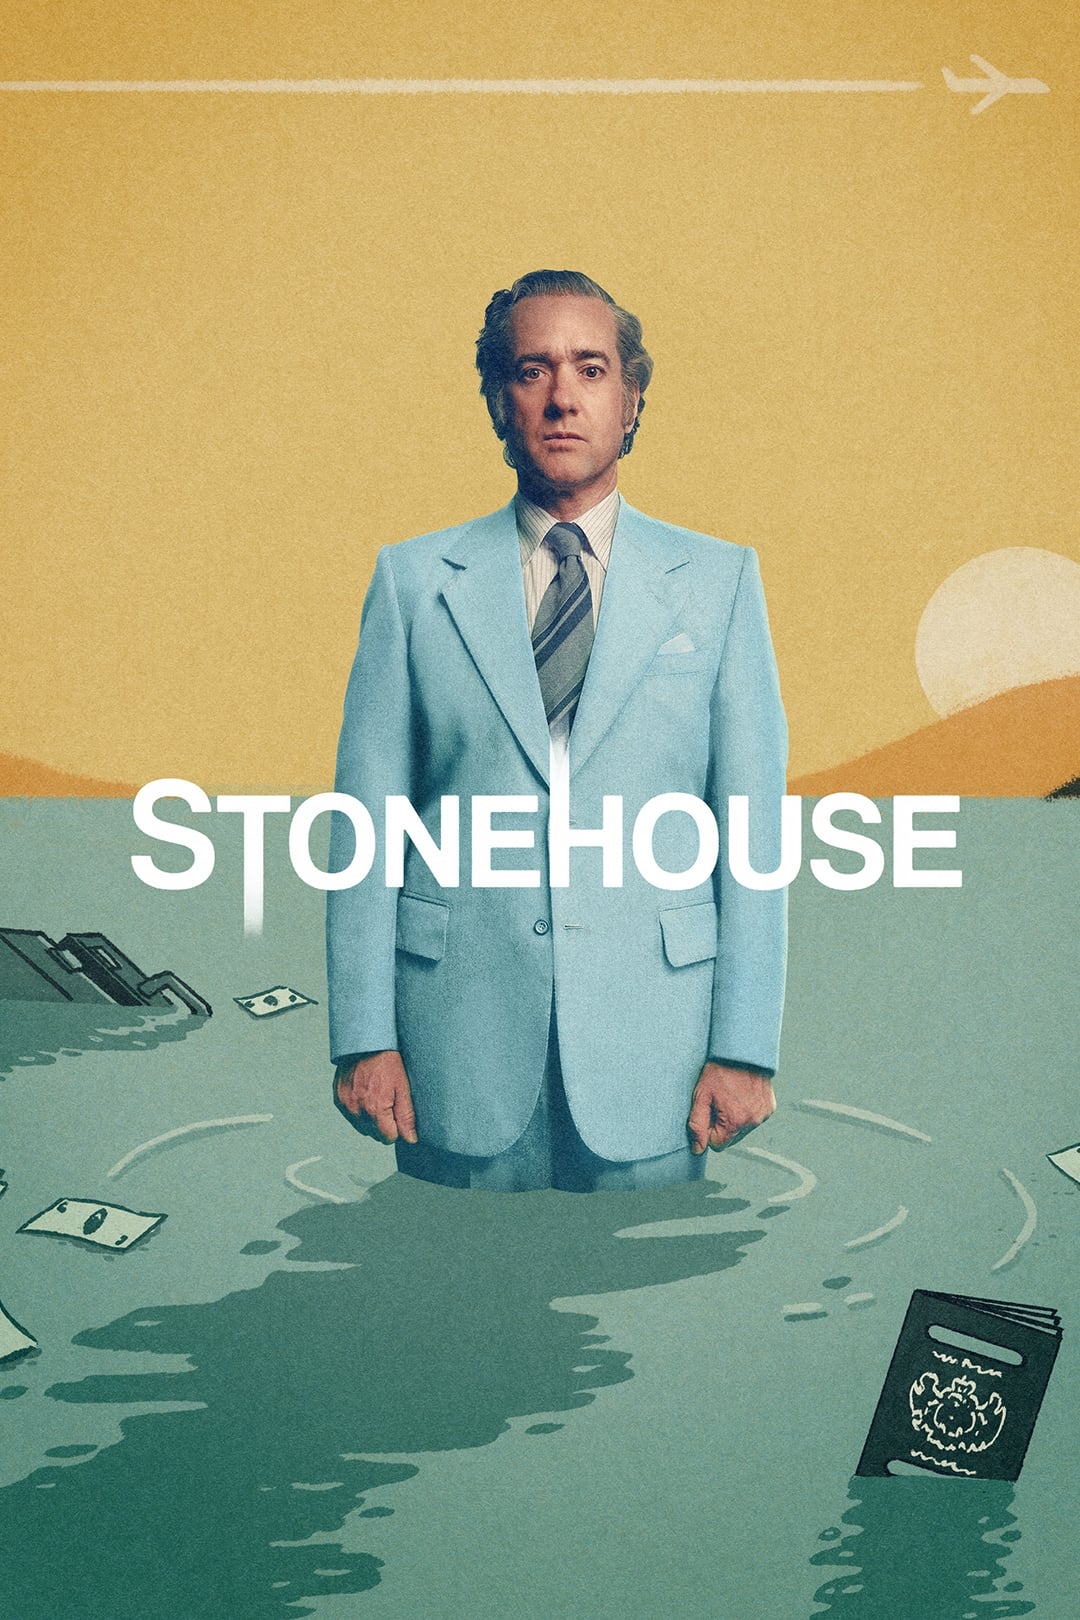 Stonehouse TV Shows About Race